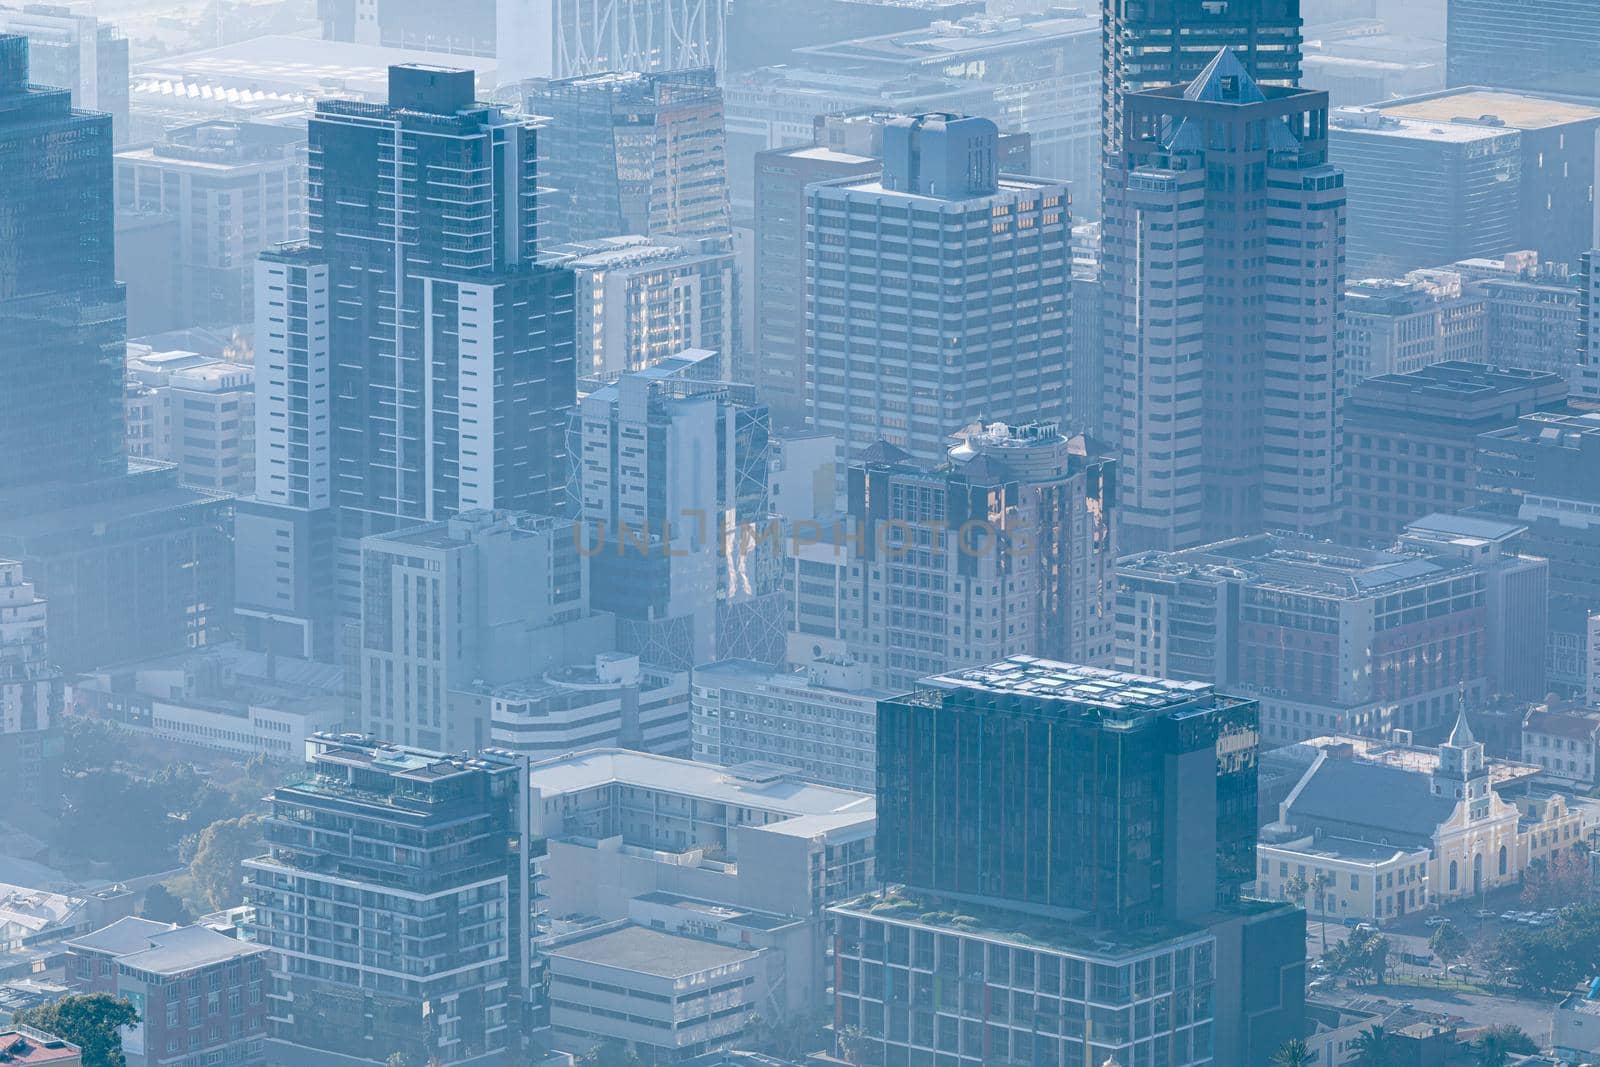 General view of cityscape with multiple modern buildings and skyscrapers in the foggy morning by Wavebreakmedia